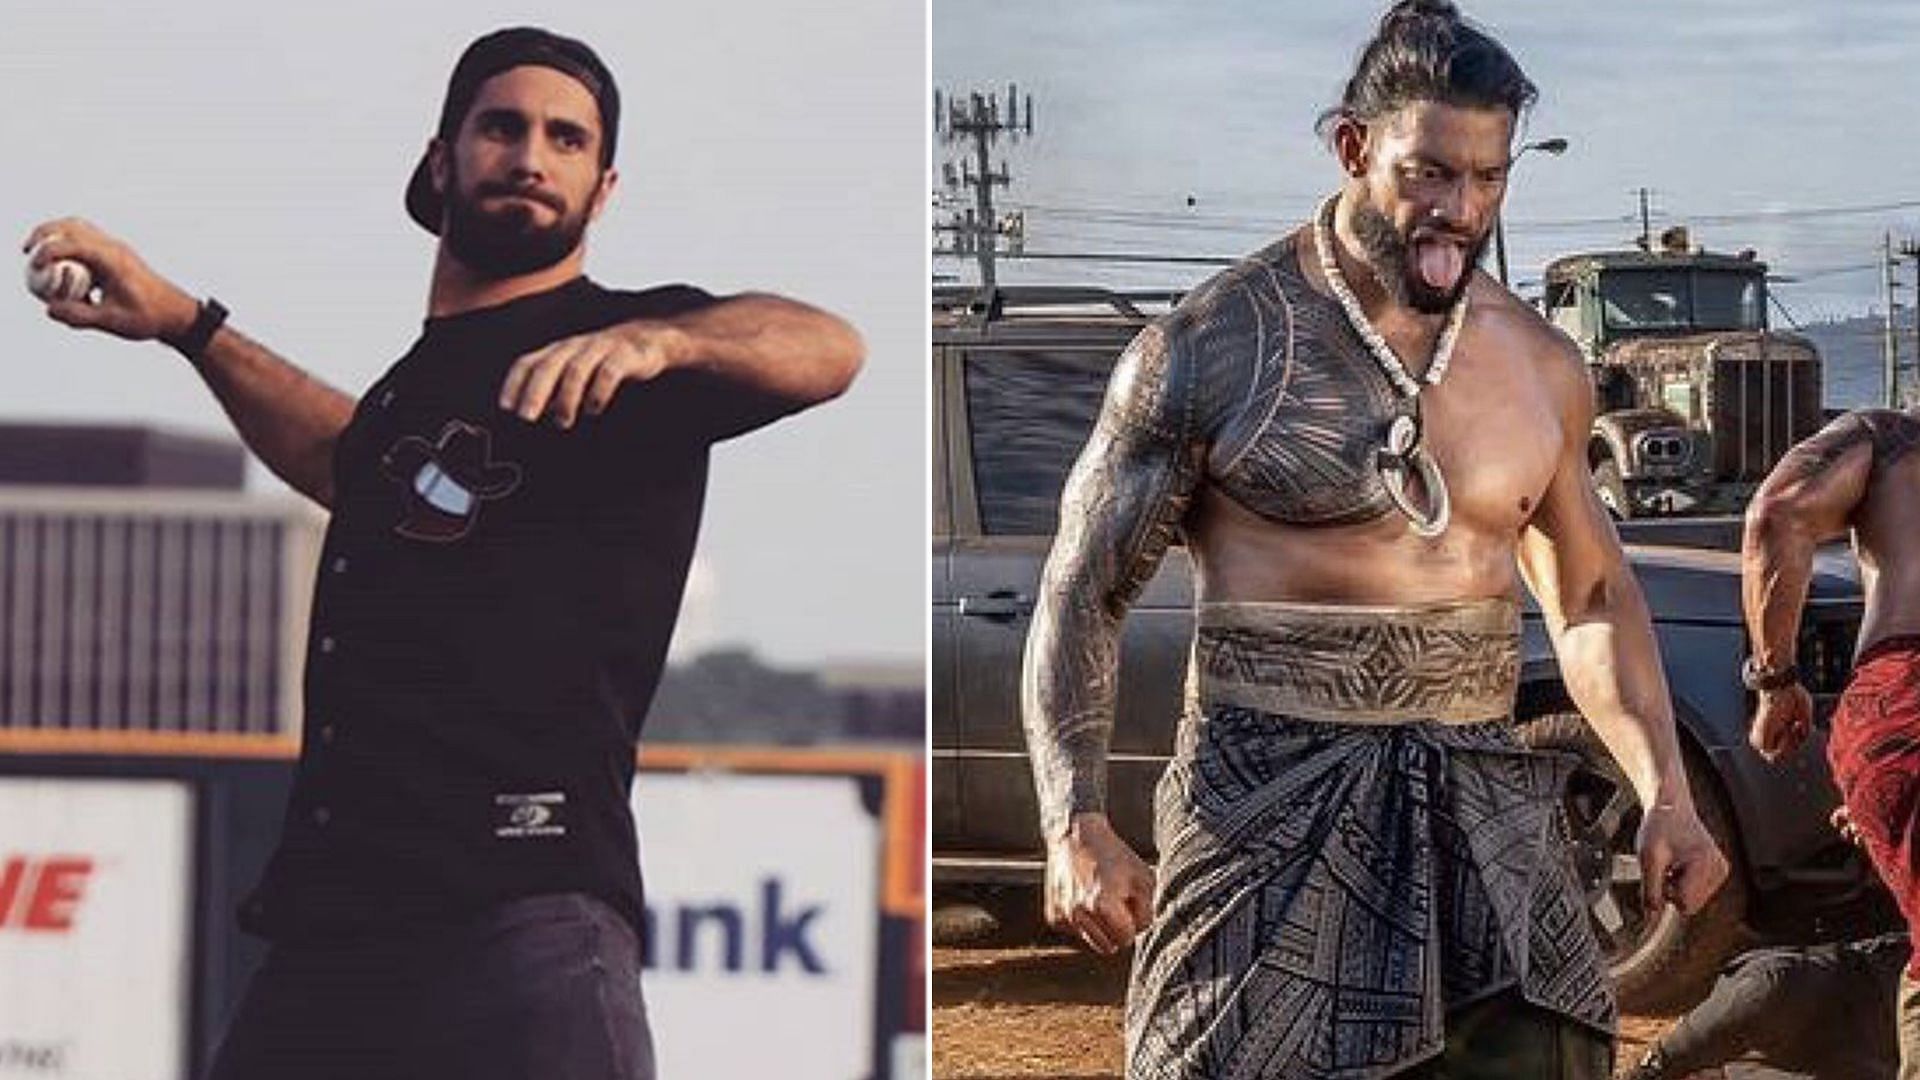 Roman Reigns and Seth Rollins have made plans following their retirement from WWE.